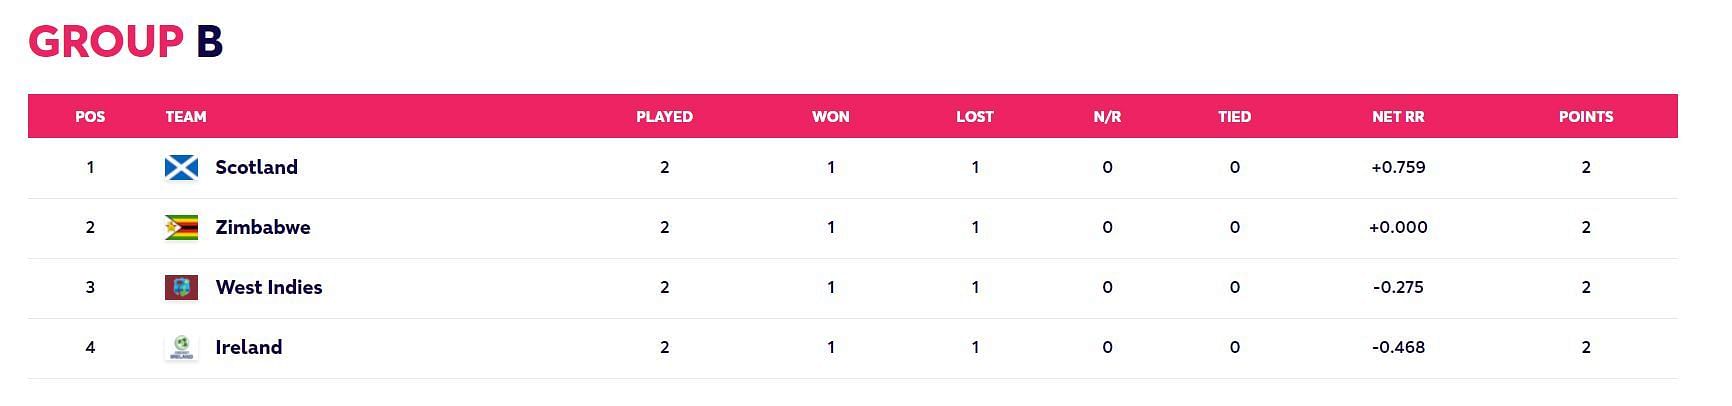 Updated Points Table after Match 8 (Image Courtesy: www.t20worldcup.com)